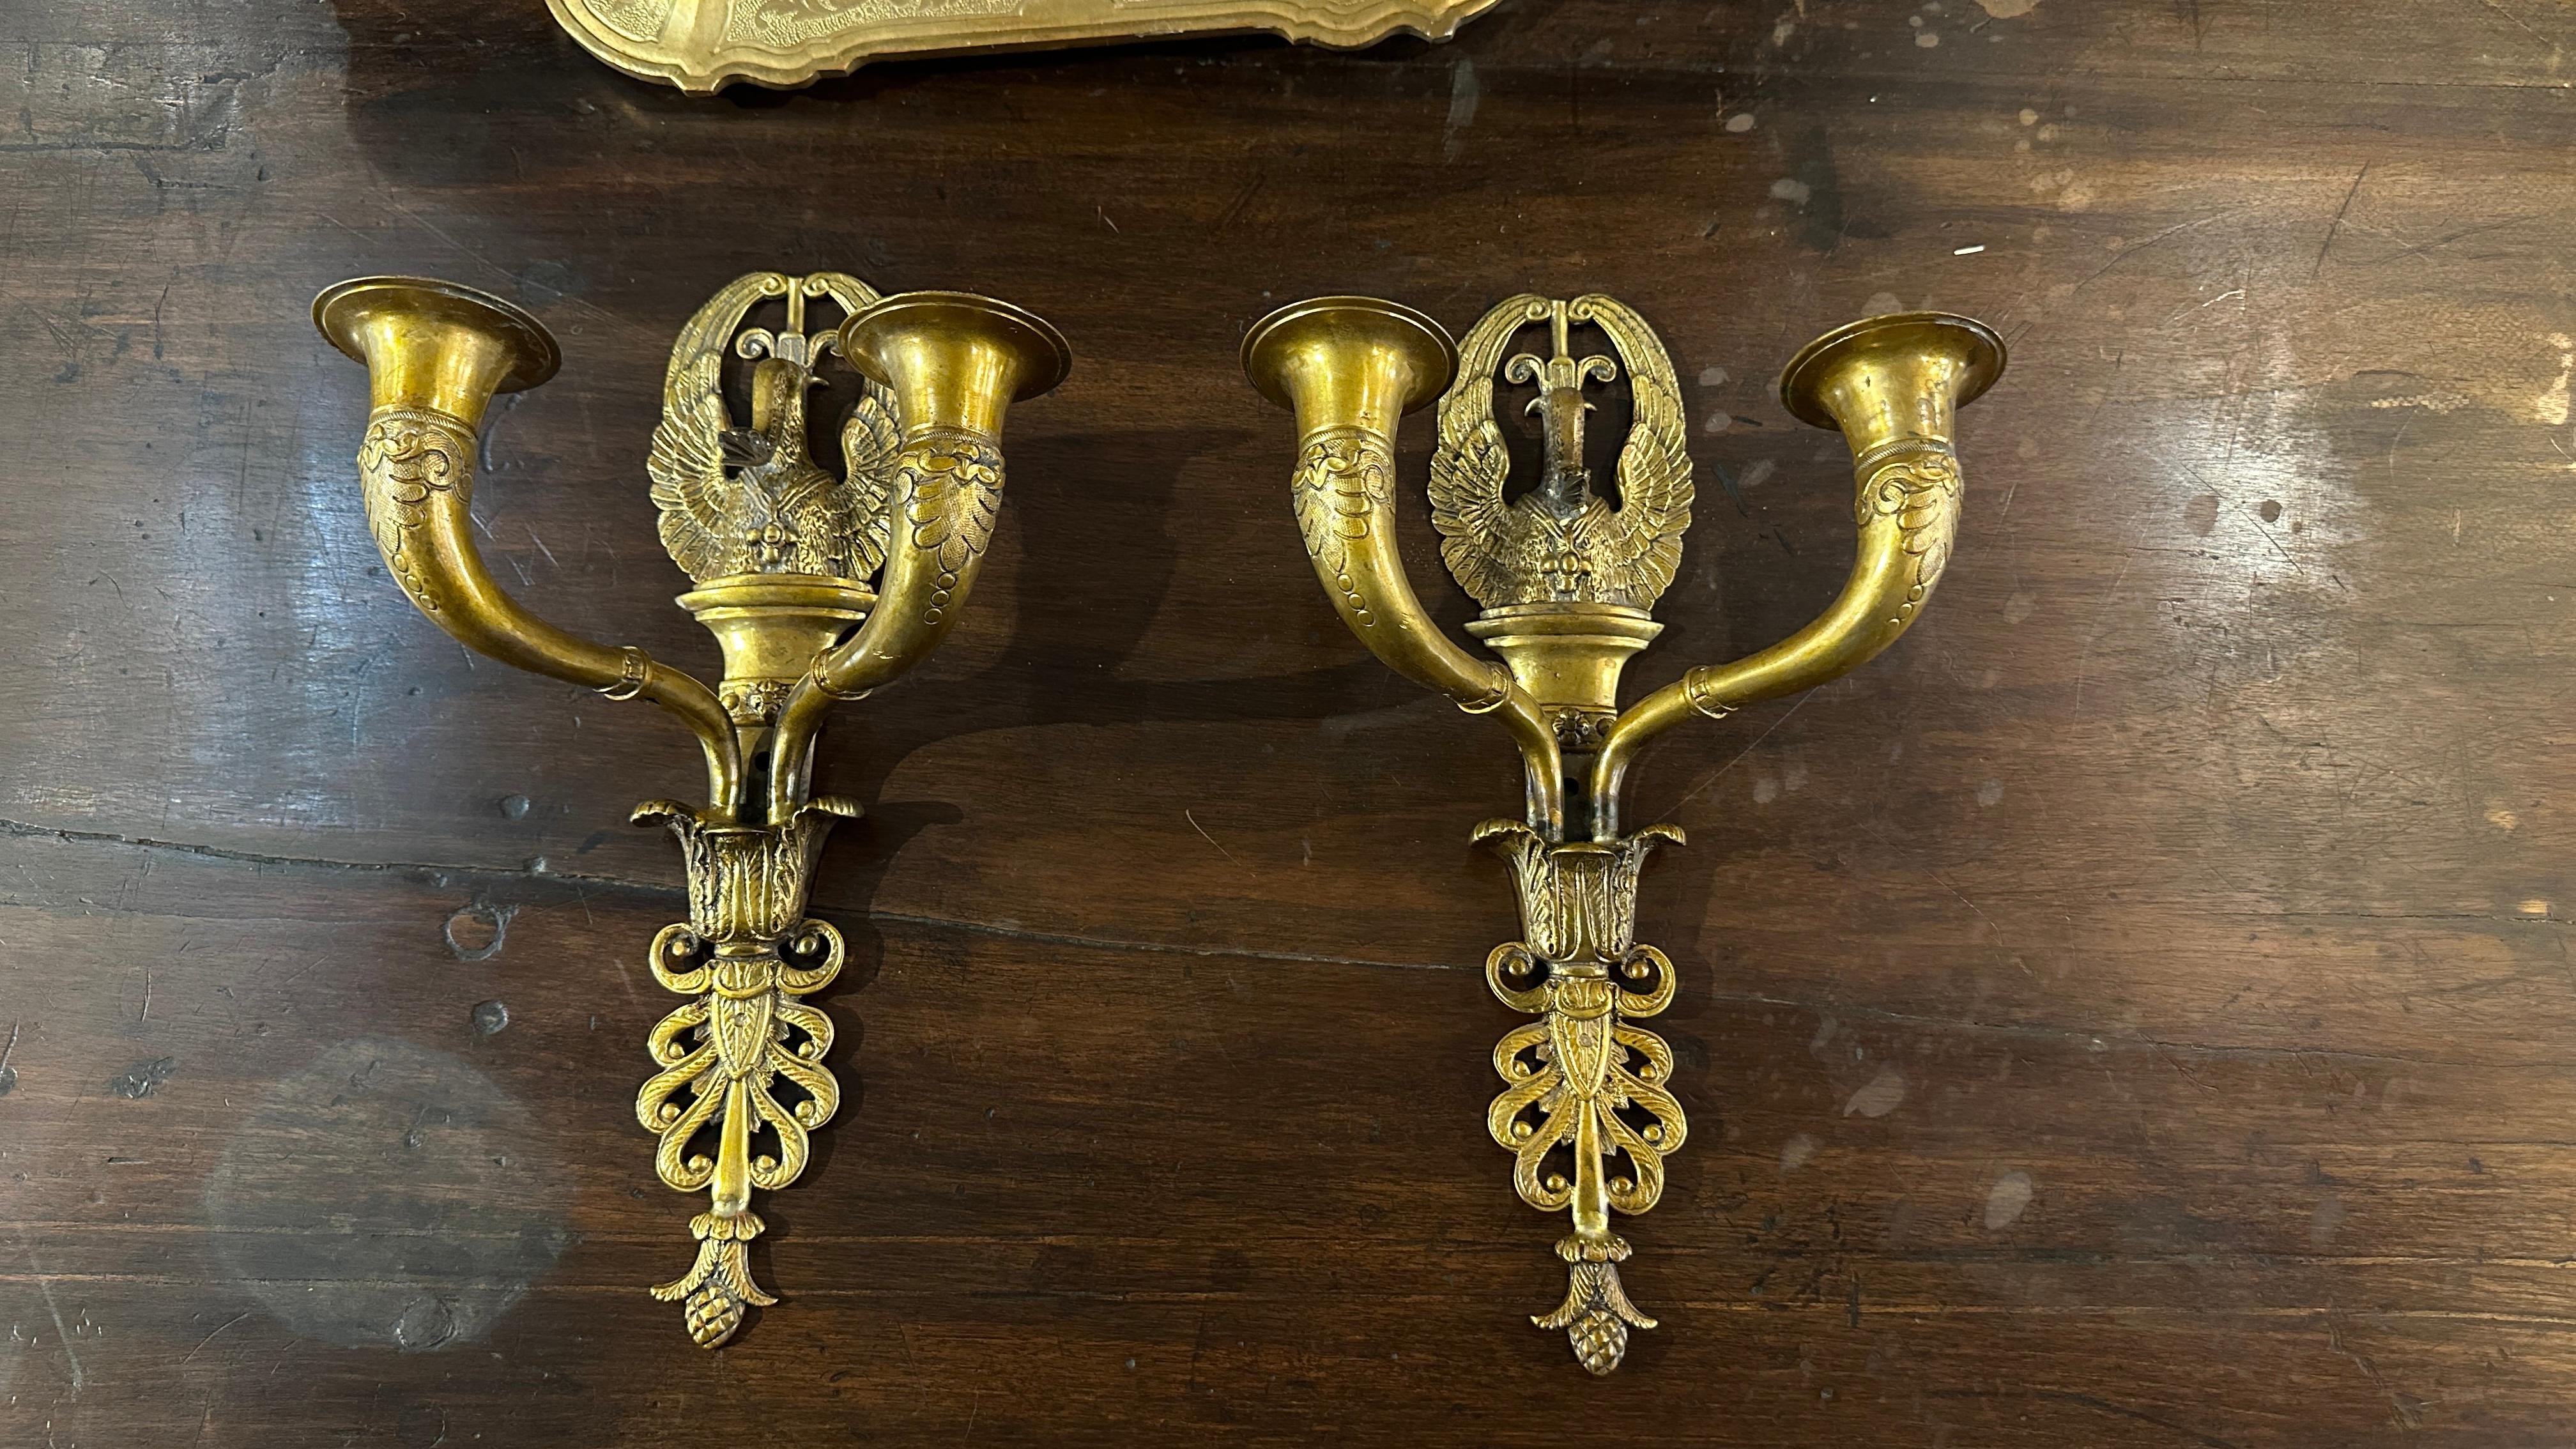 These two gilt bronze Empire style sconces date back to the period of Napoleon III, which corresponds to the Second French Empire between 1852 and 1870. This style takes inspiration from the art of ancient Rome and the era of Napoleon Bonaparte's